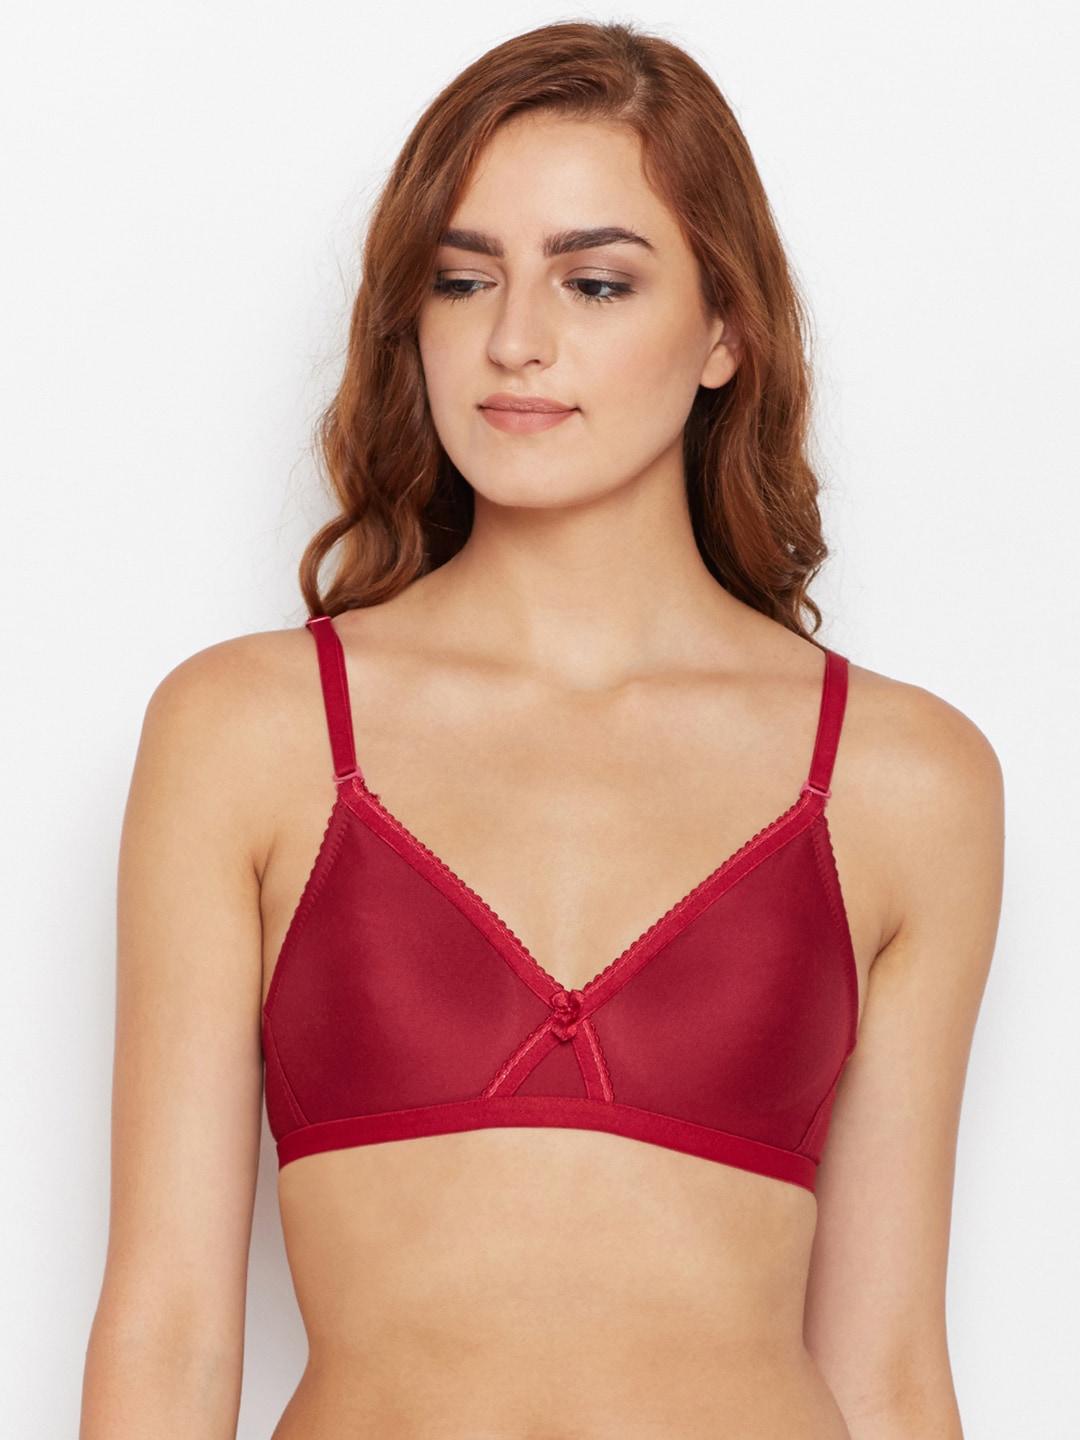 bodycare-women-pack-of-3-maroon-solid-t-shirt-bra-5551mh